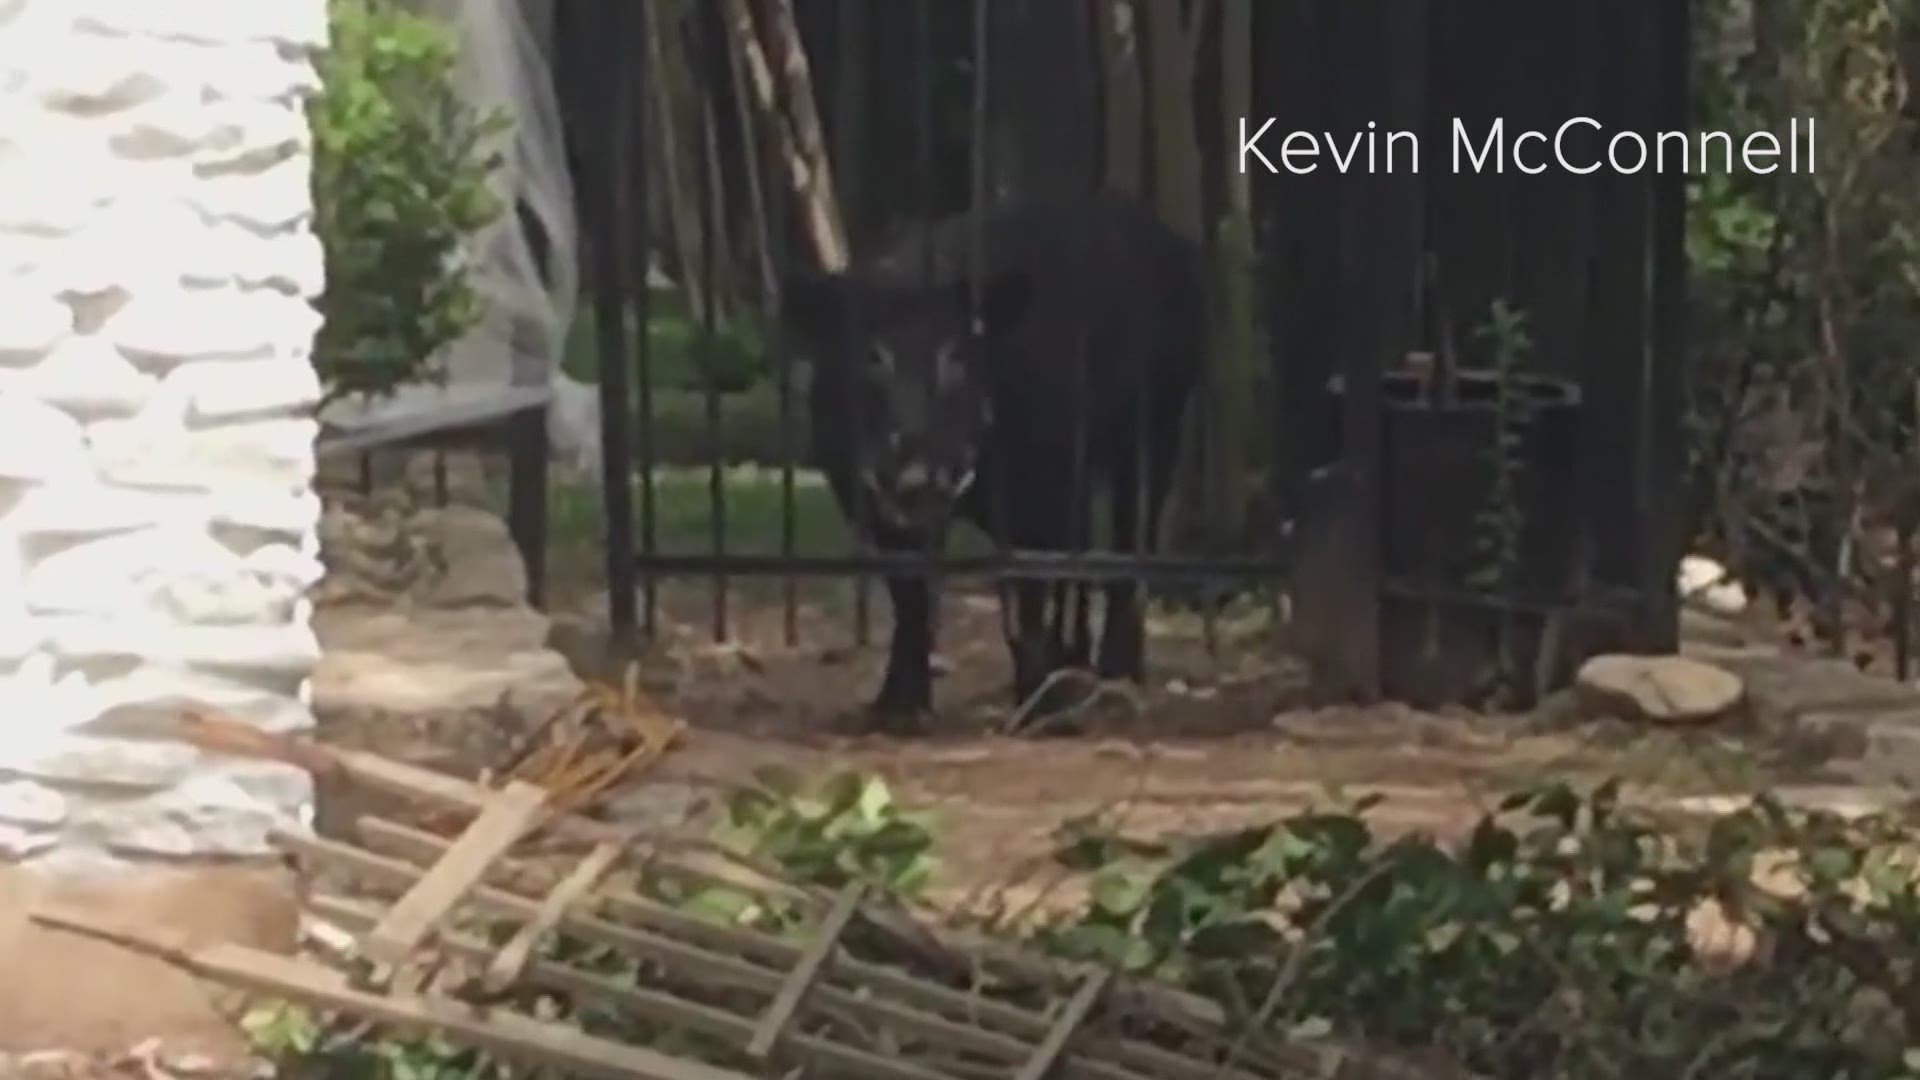 Feral hogs are common in Texas. But northwest Austin neighbors are encouraging others to be on the lookout after a recent attack showed how dangerous they can be.